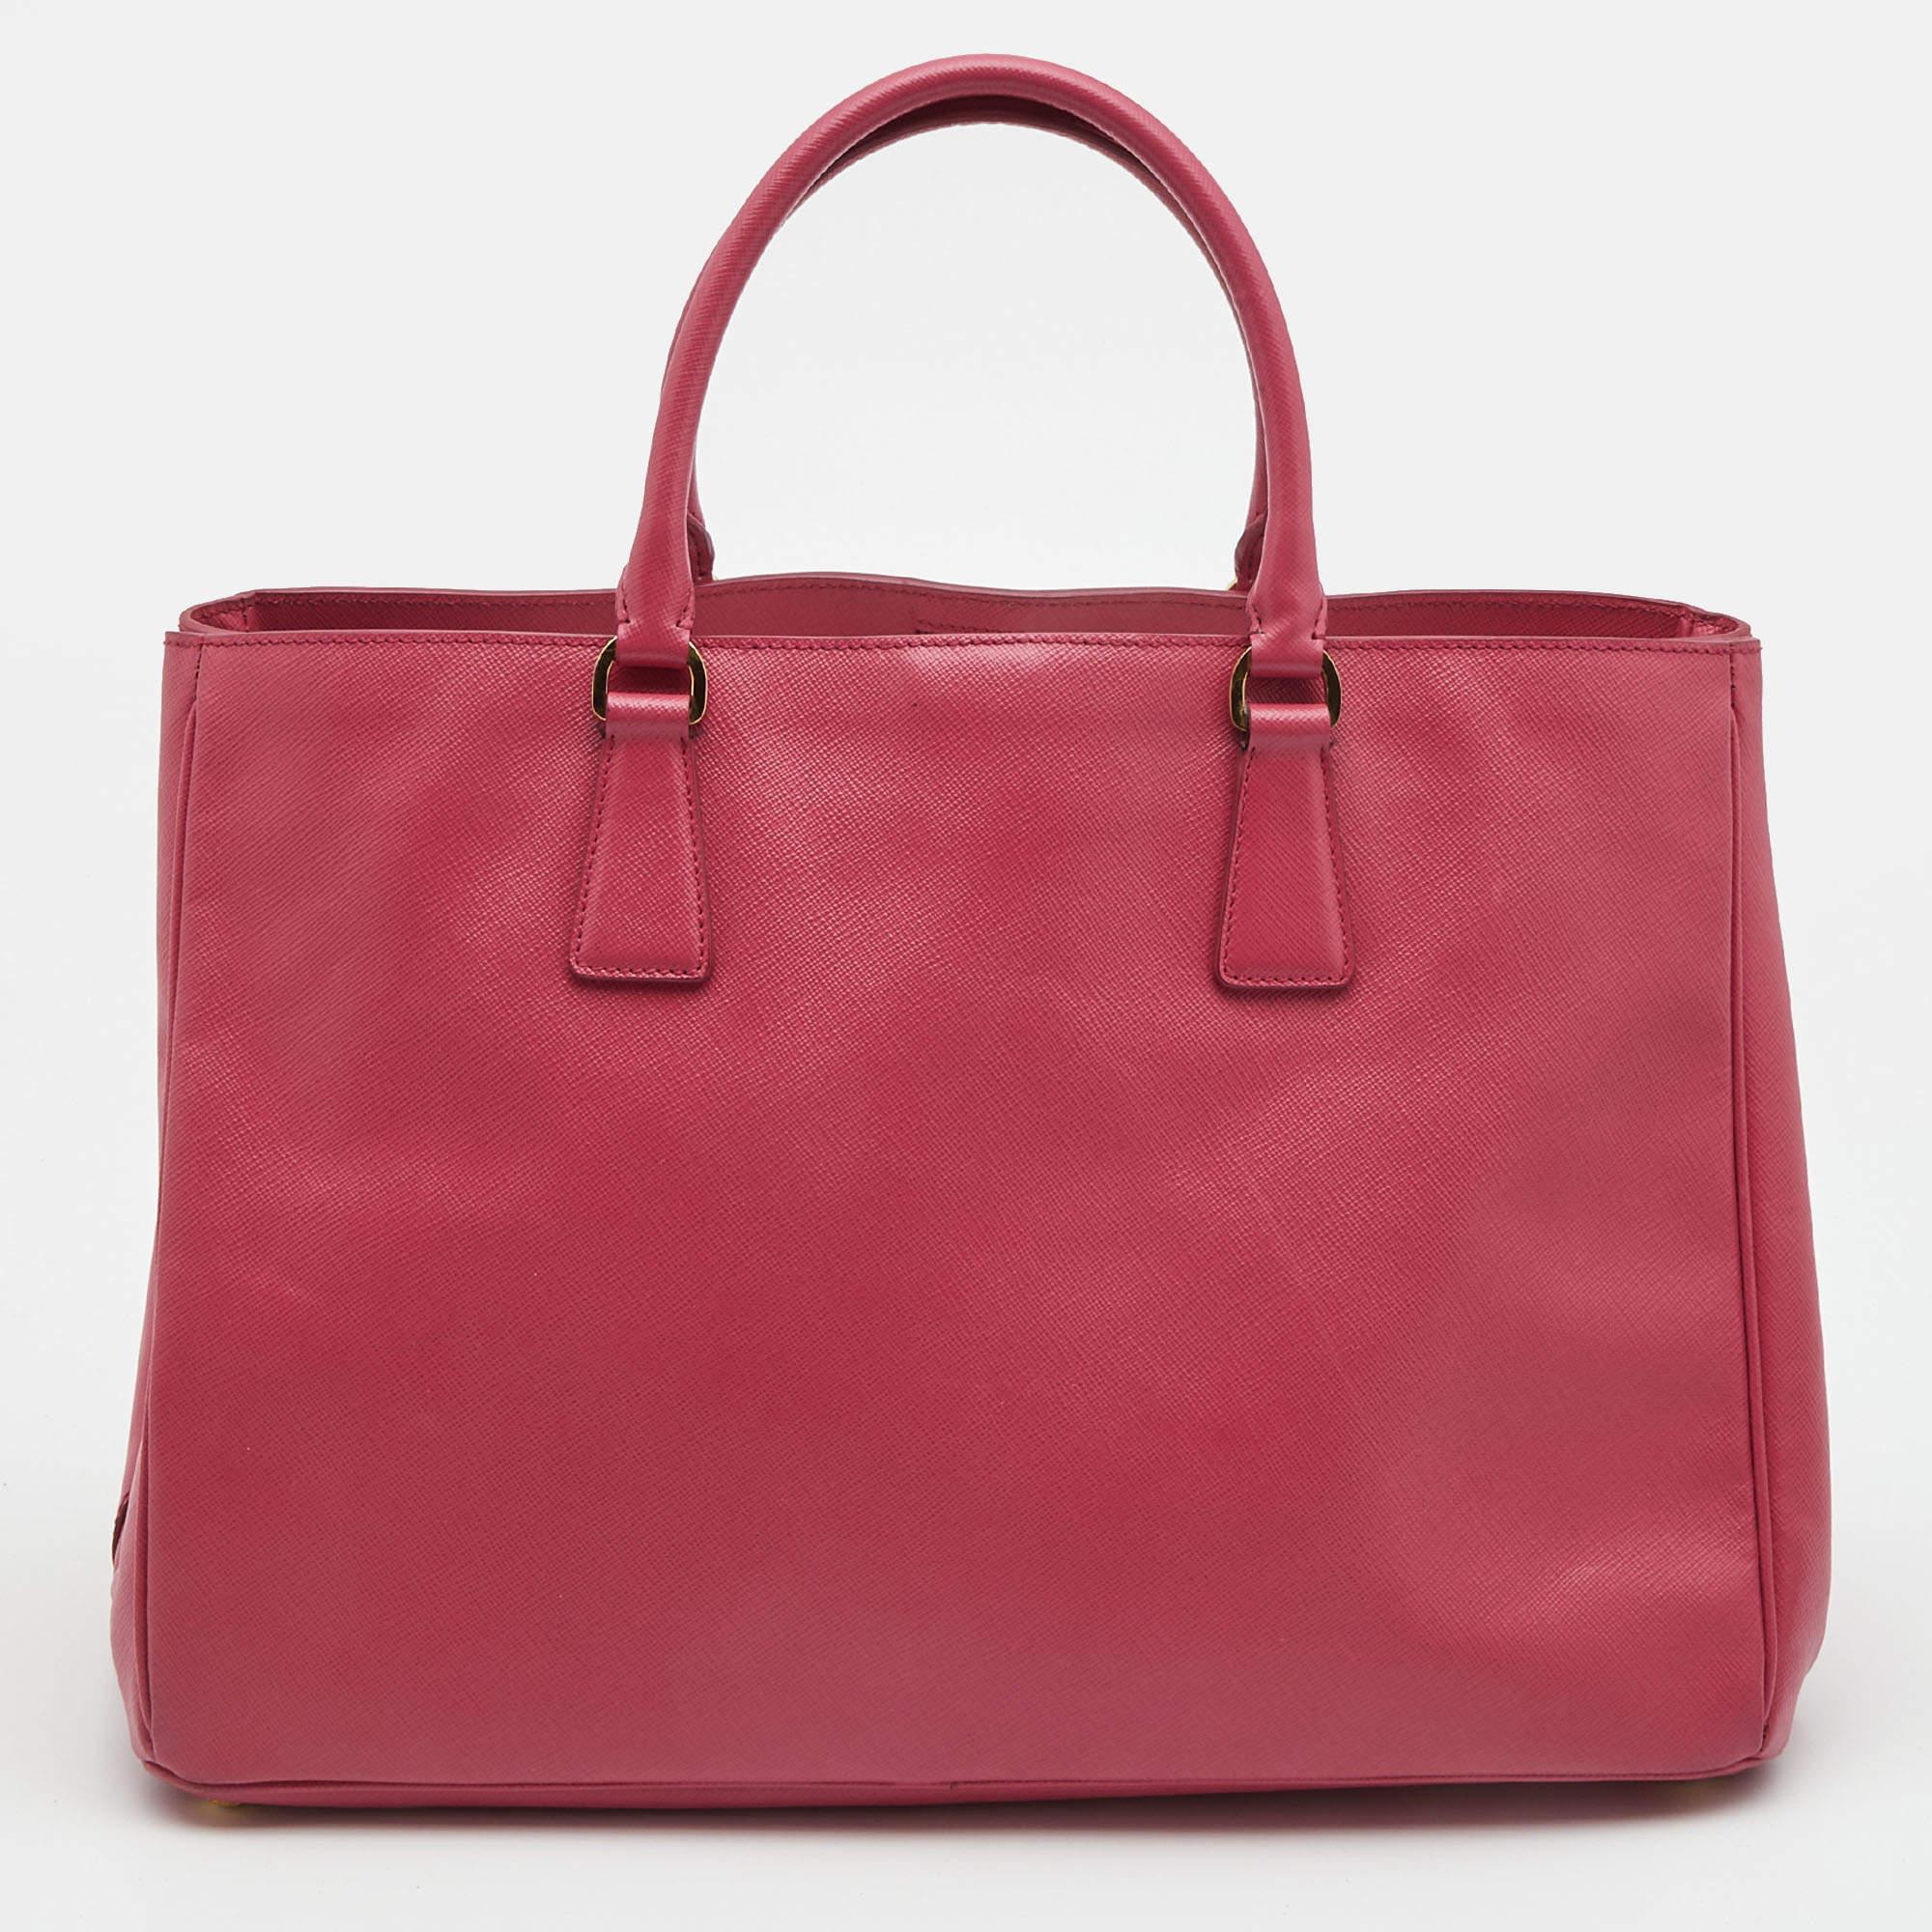 Sophisticated and timeless, this practical Gardener's tote by Prada aims to elevate your daily style. It is crafted from durable Saffiano lux leather in an elegant shade of pink. The bag features a front Prada logo, double handles, a leather-covered